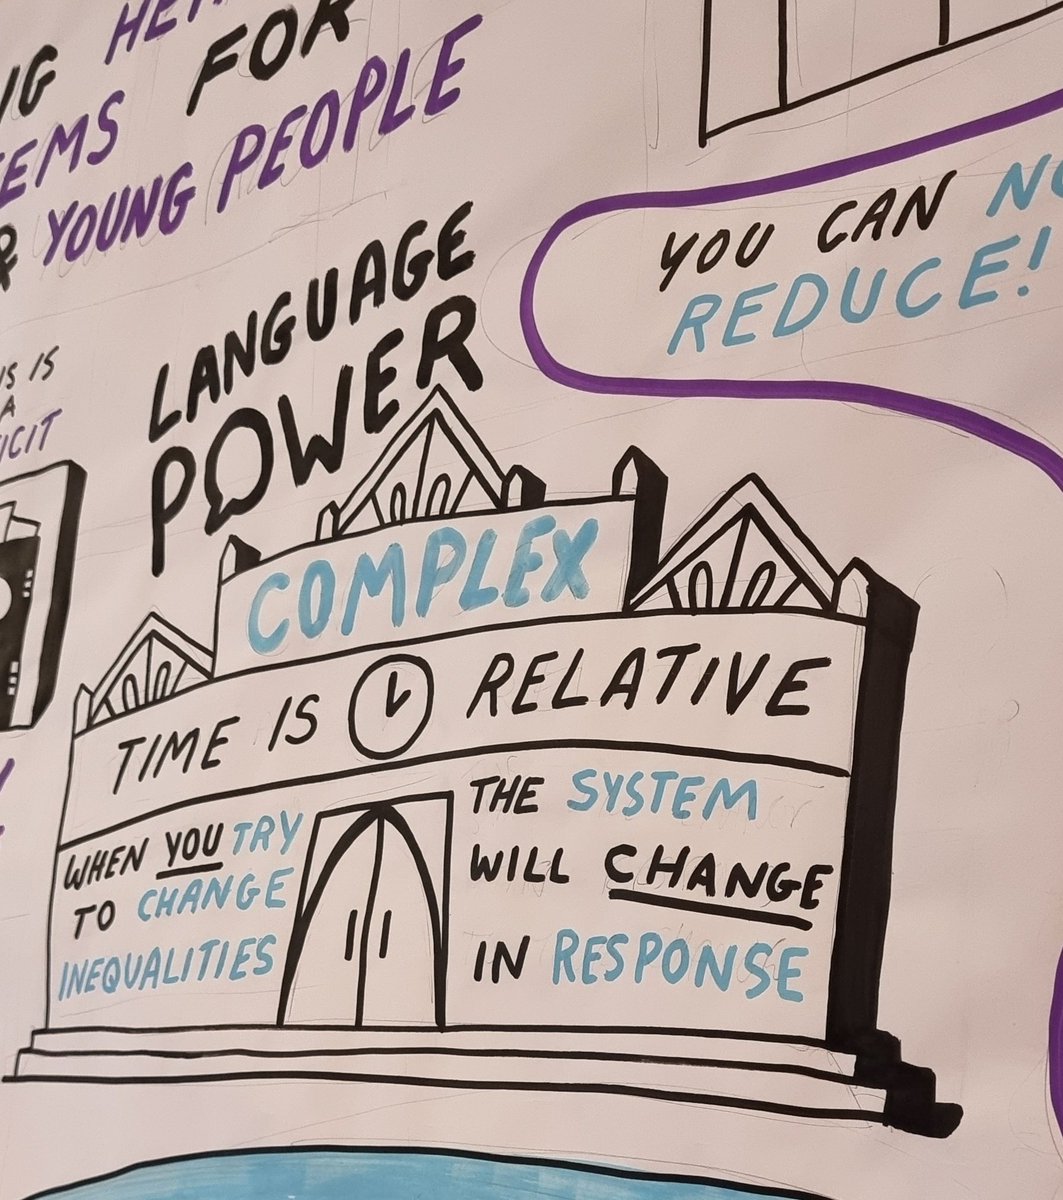 @ESNBarnsley Thanks, it was a great day, and everyone was passionate to address #heath #inequality and #inequity. I hope the #systemslens provided insights into opportunities to tip the #system. Thanks, @thomasbradshaw and @scriberian for great work as always.